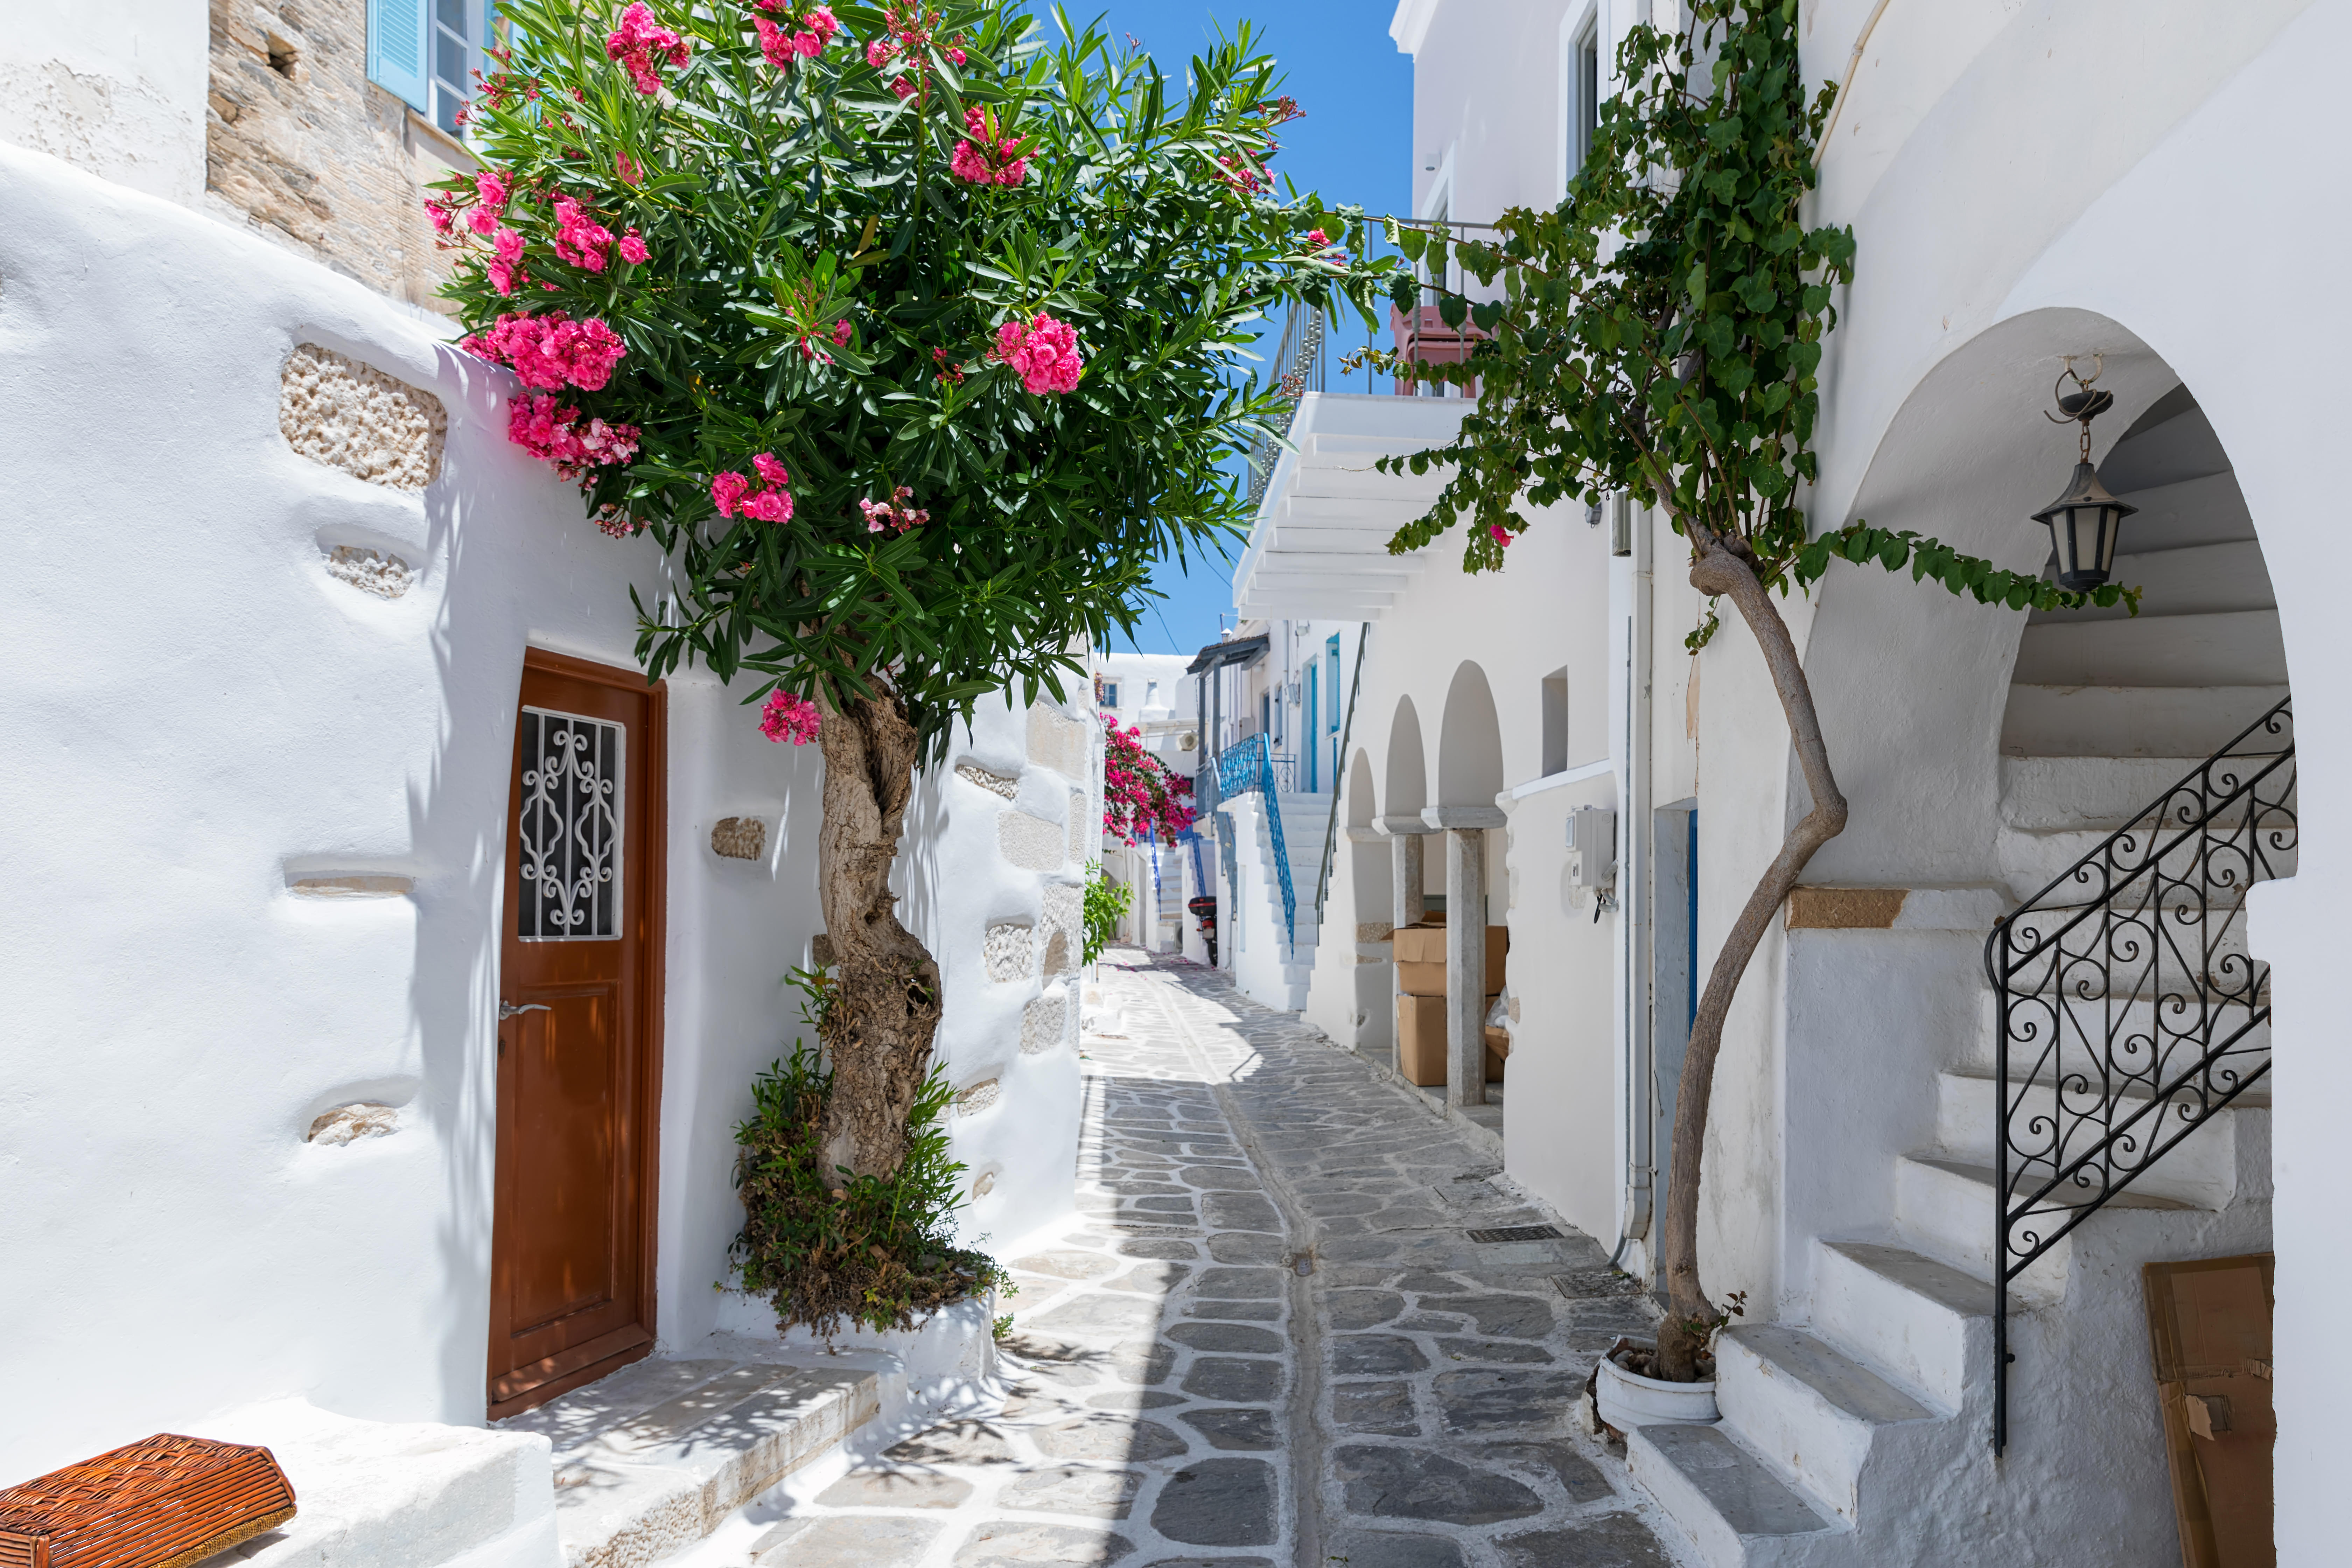 Greece Packages from Hyderabad | Get Upto 50% Off